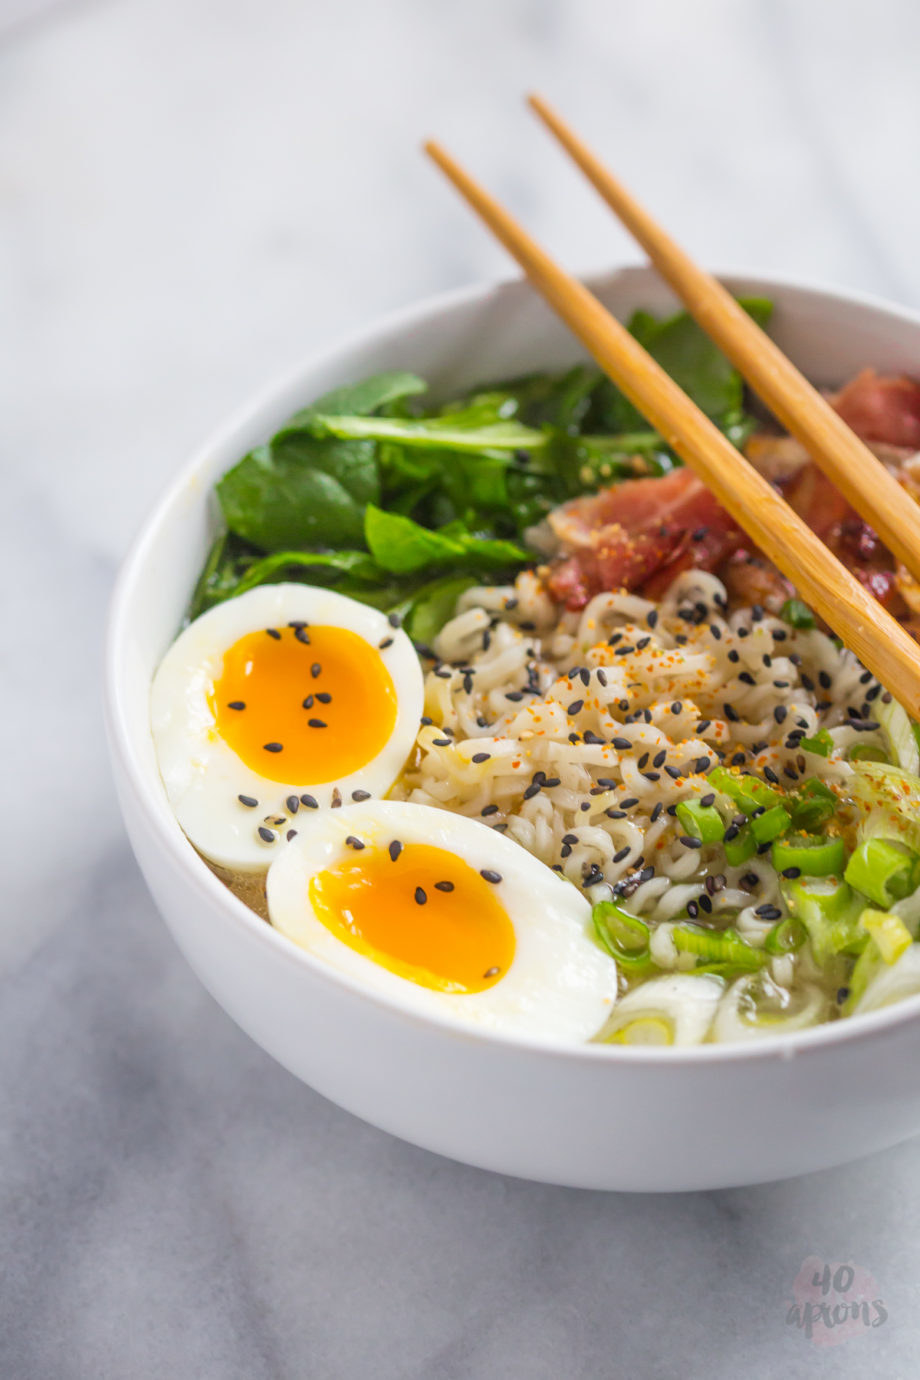 A bowl of ramen noodle soup with scallions, bacon, and soft boiled egg.